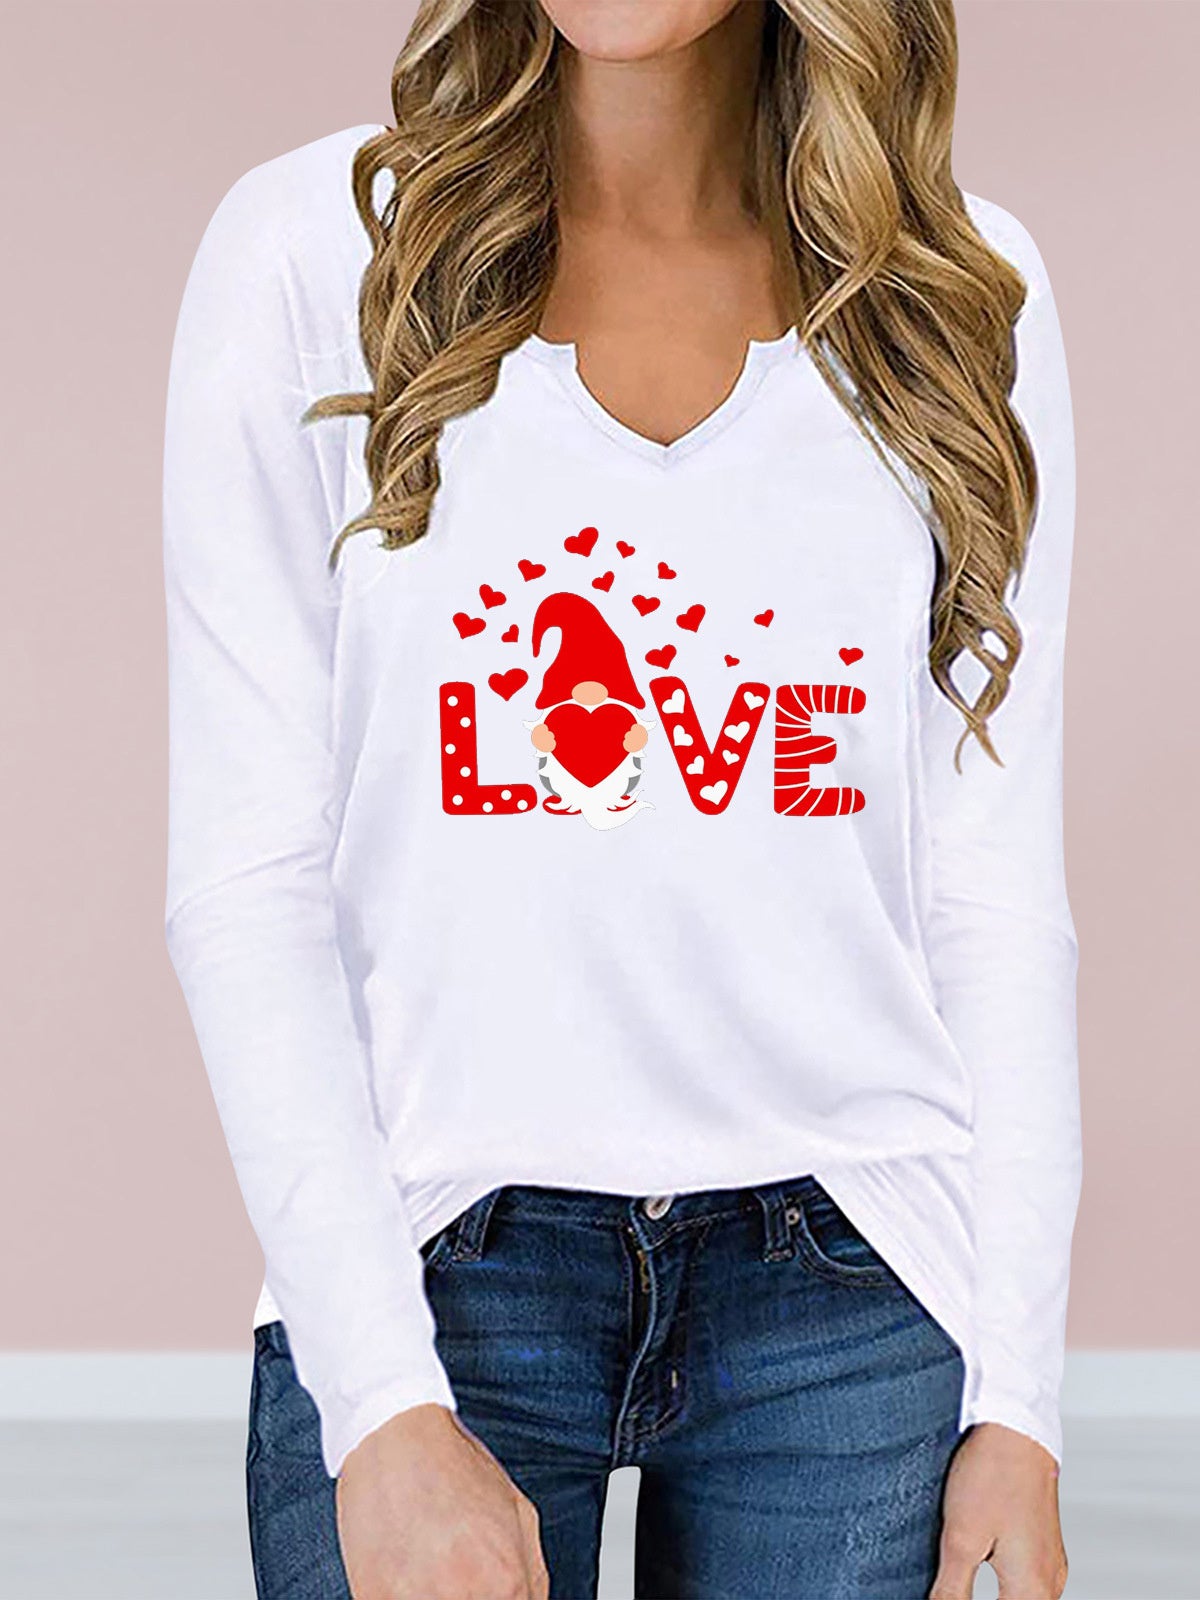 Women's Long Sleeve V-neck Graphic Printed Top